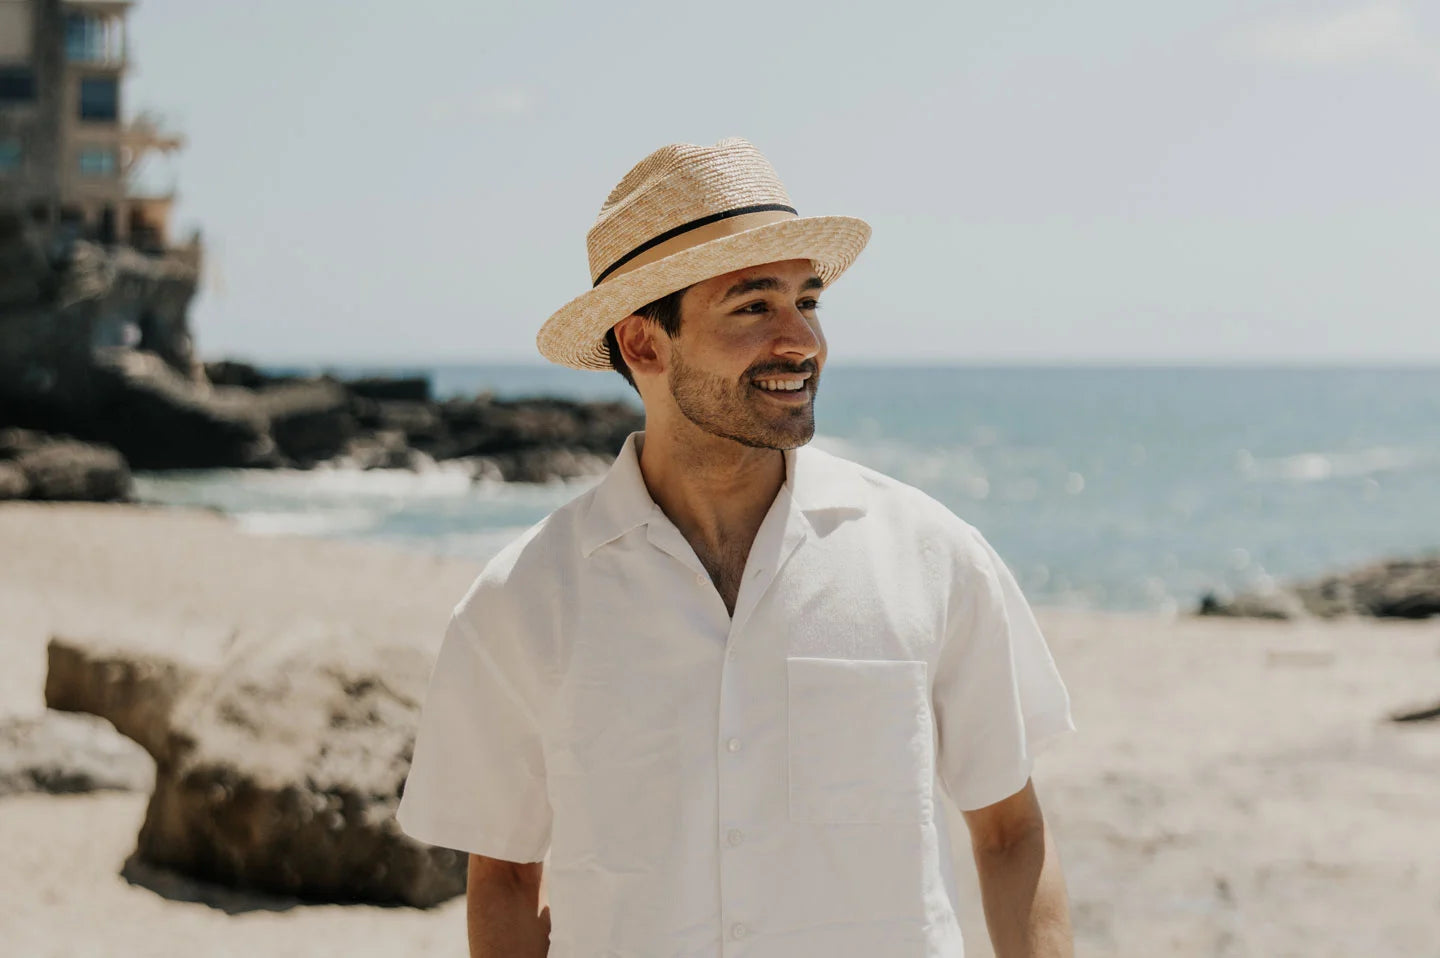 A man strolling on the beach wearing a white polo and a straw sun hat